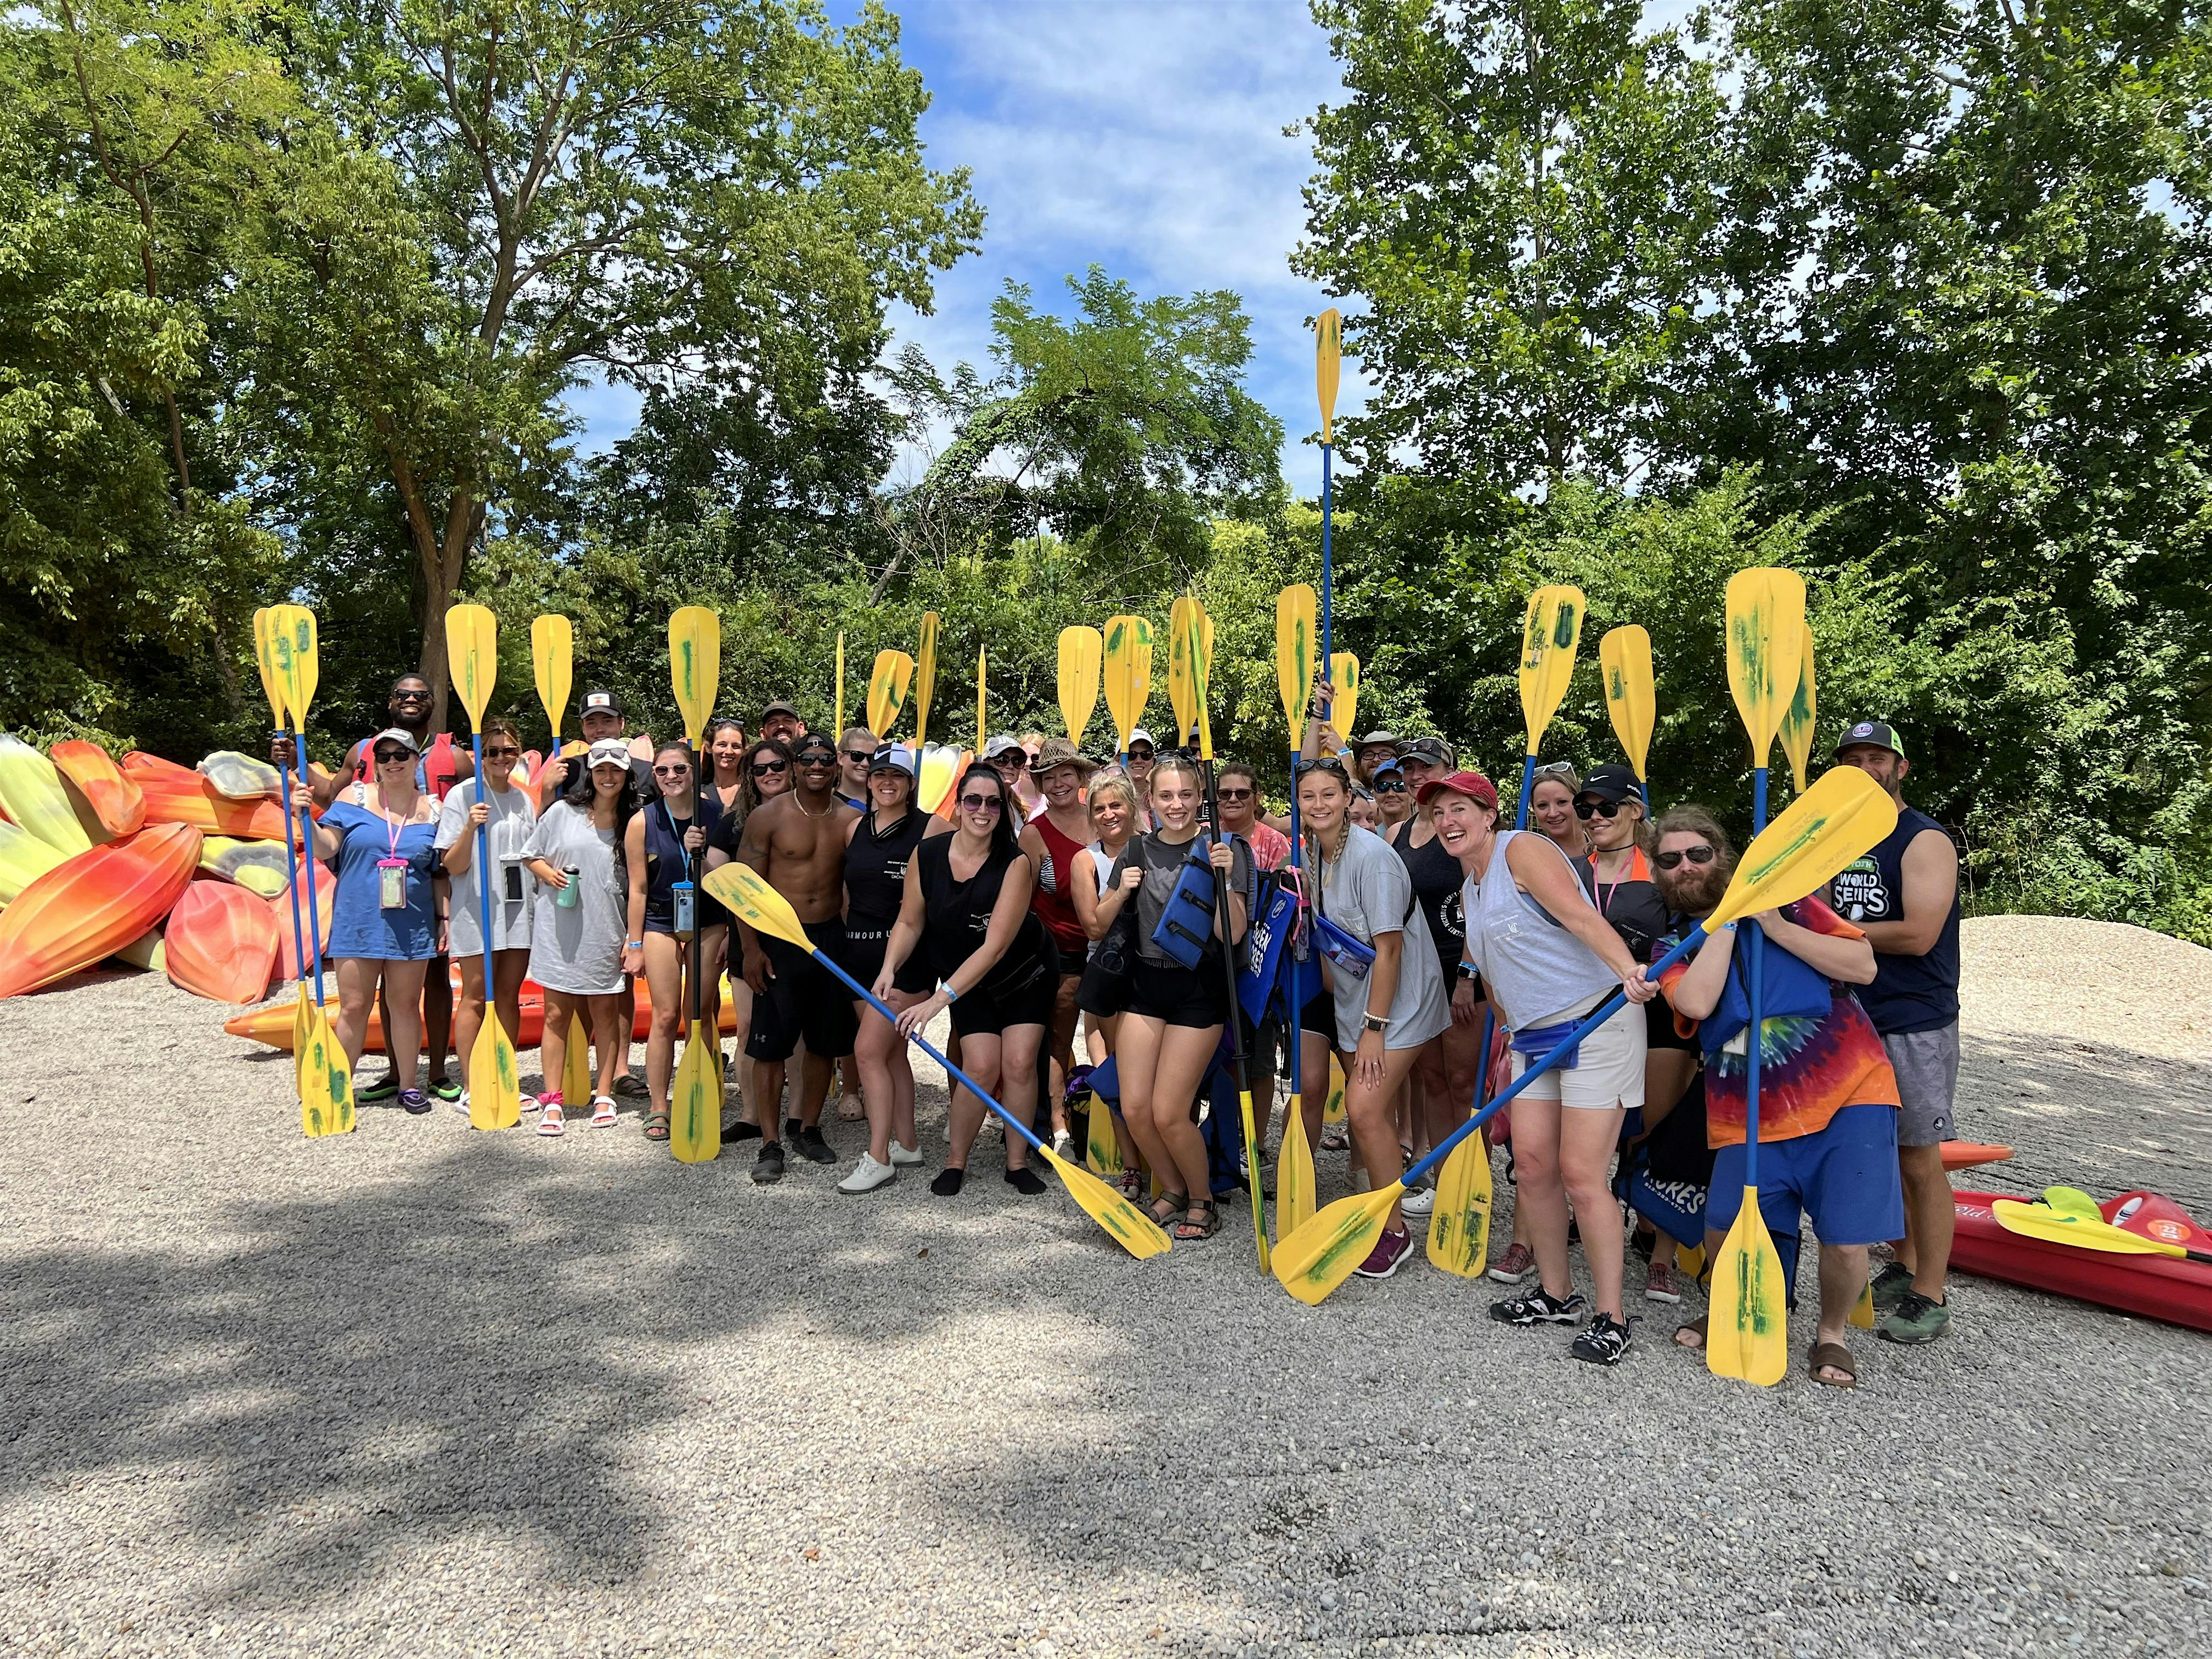 HTH Group Outing - Canoe for a Cause!